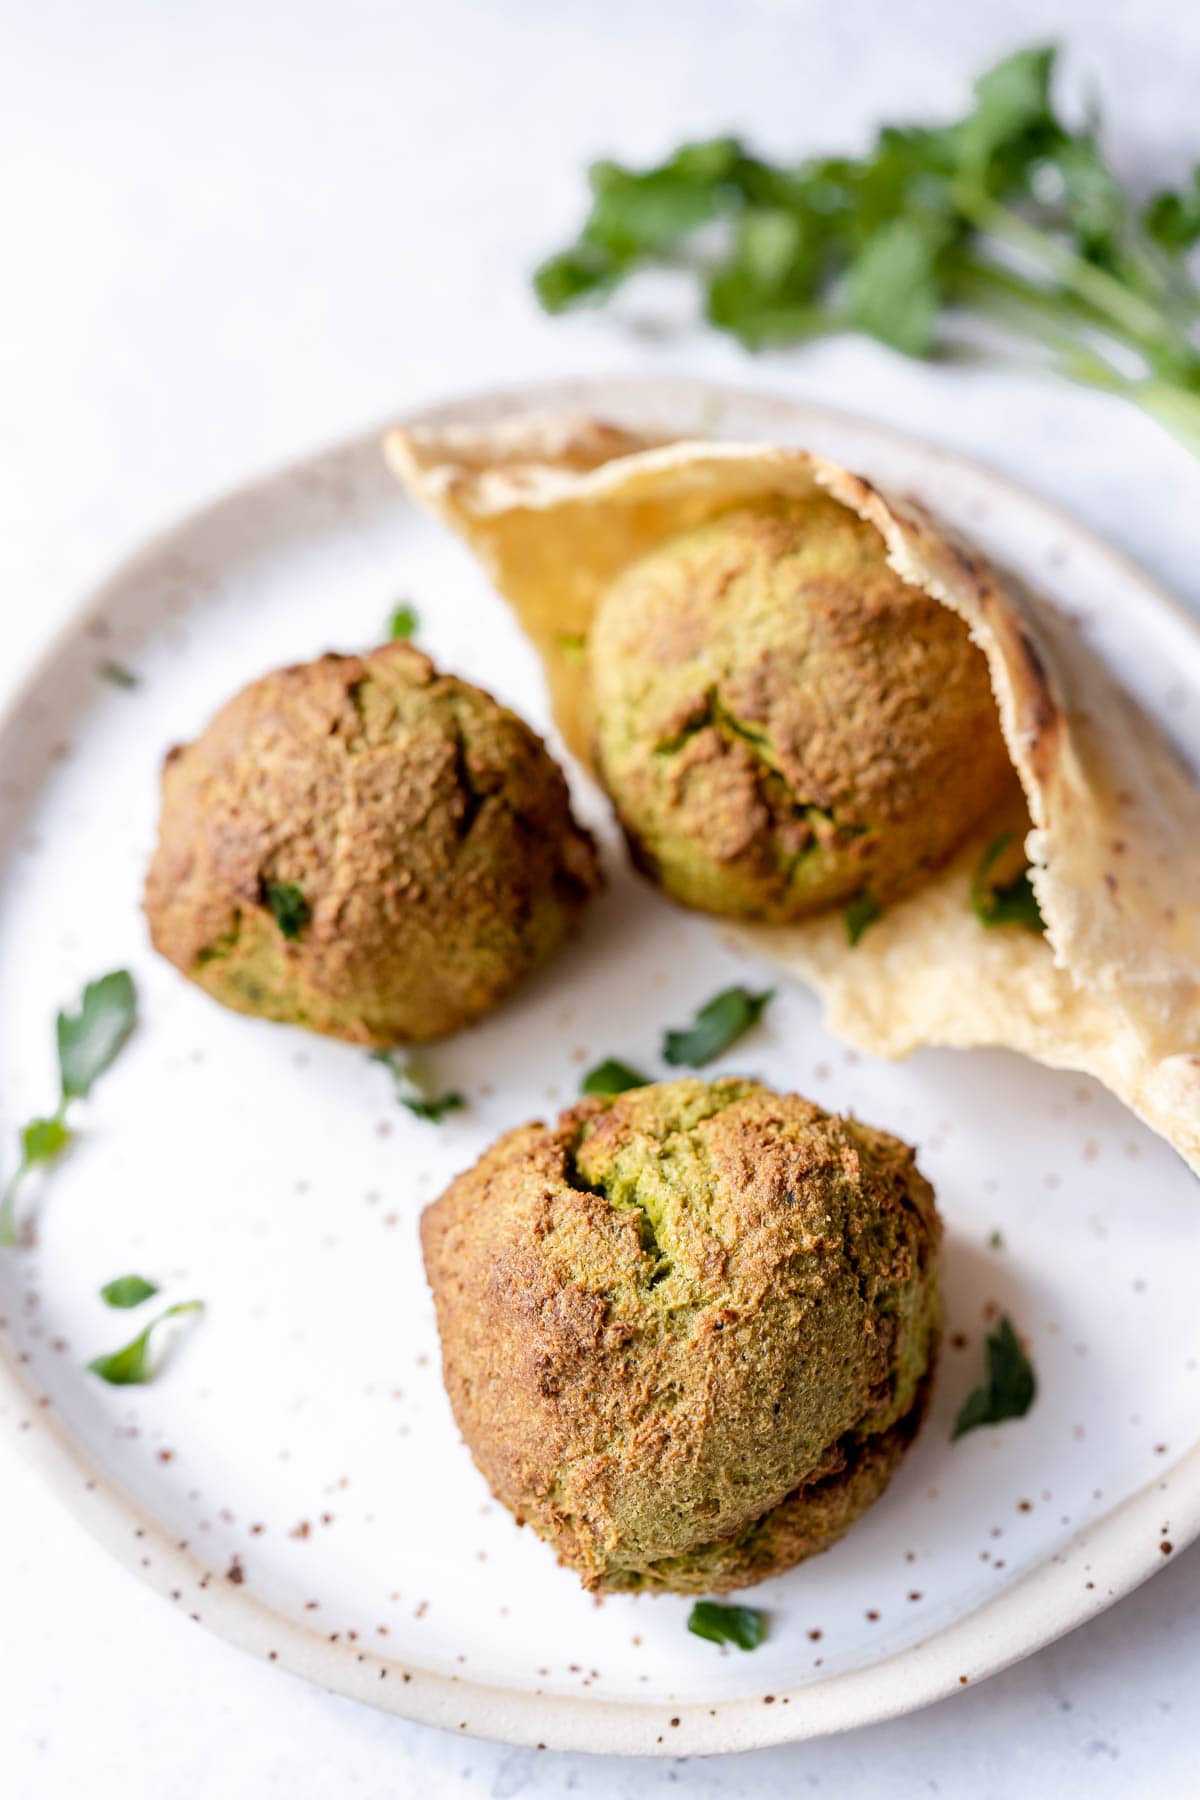 A white speckled ceramic plate topped with brown falafel balls.